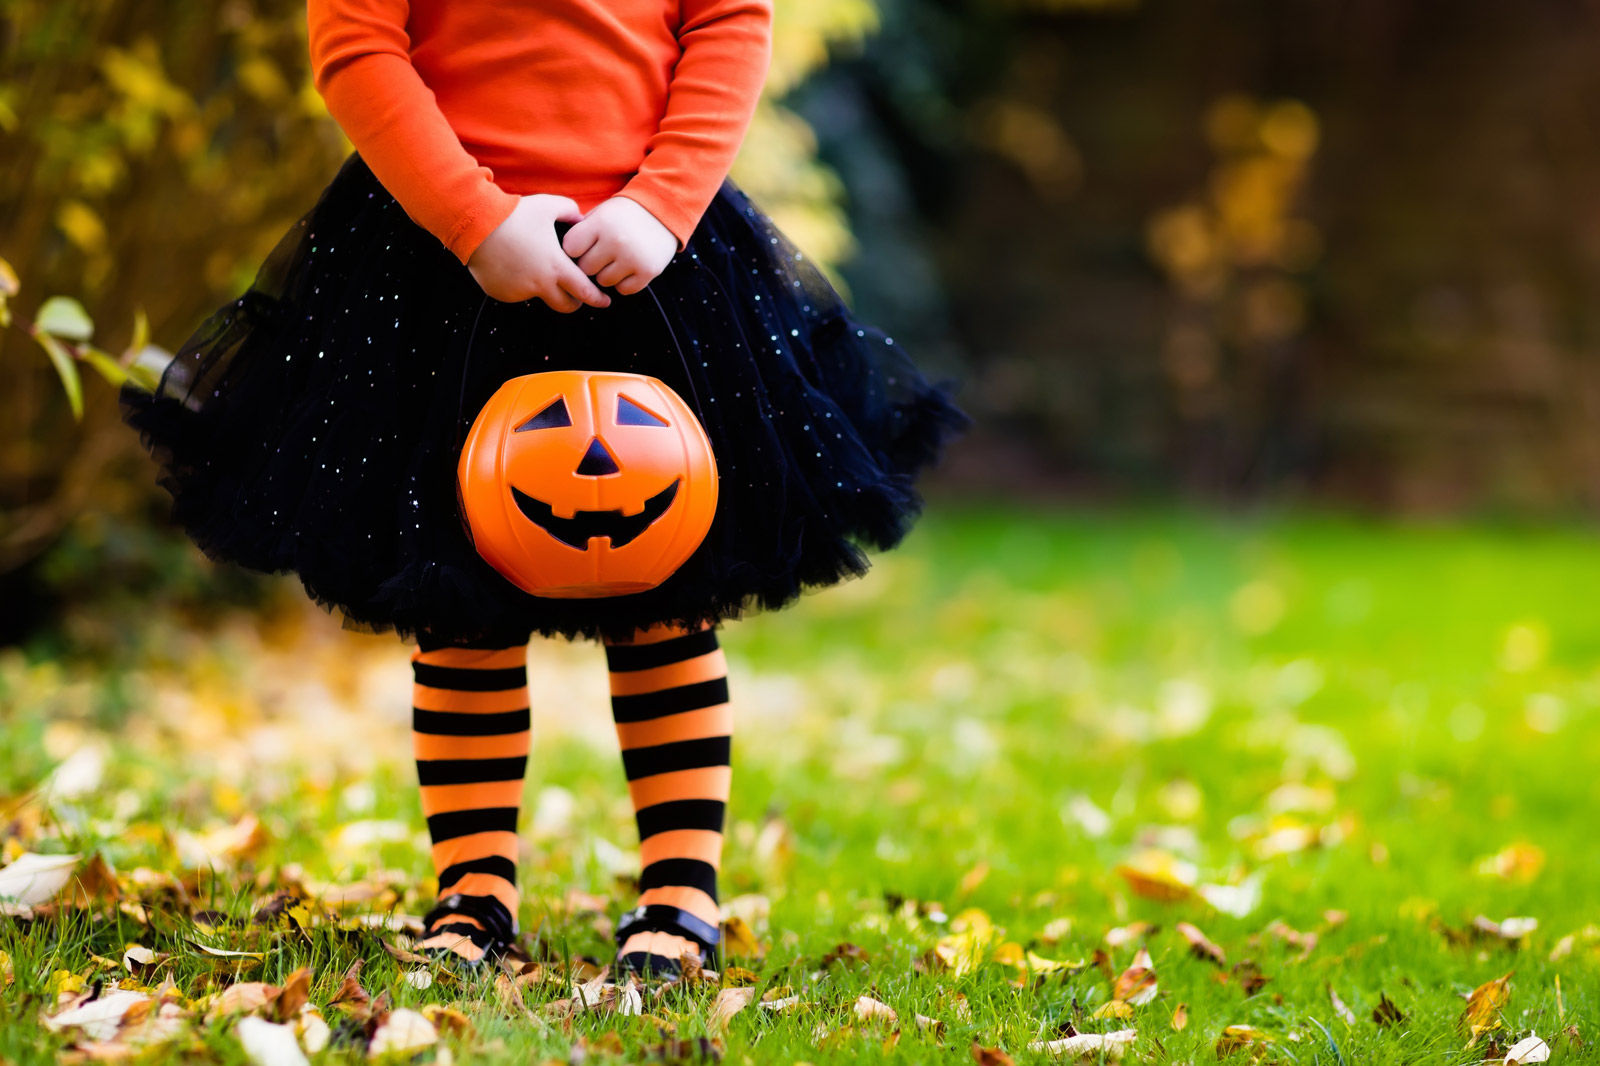 Check out some of these fun Halloween events from your hotel in Regina.